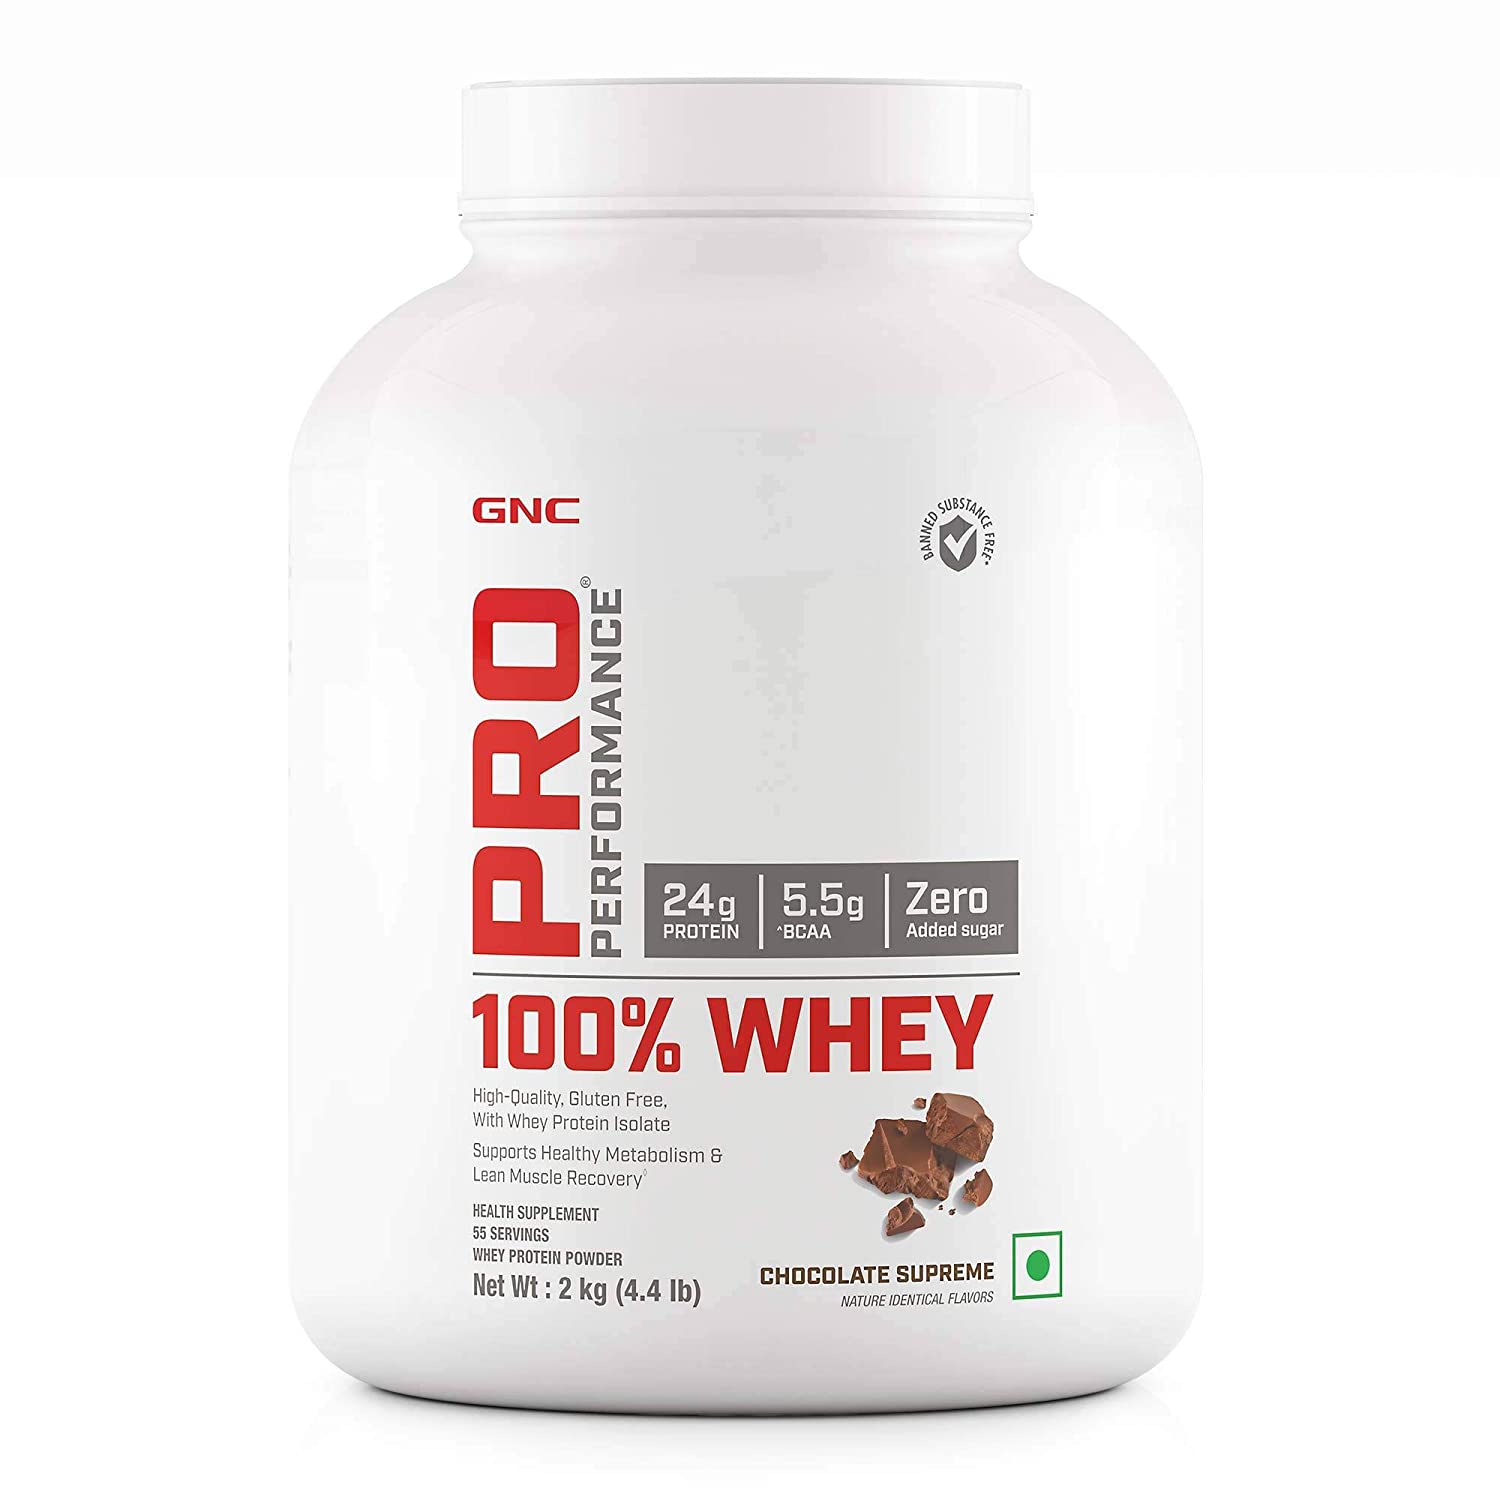 GNC Pro Performance 100% Whey Protein – 4.4 lbs, 2 kg (Chocolate Supreme)